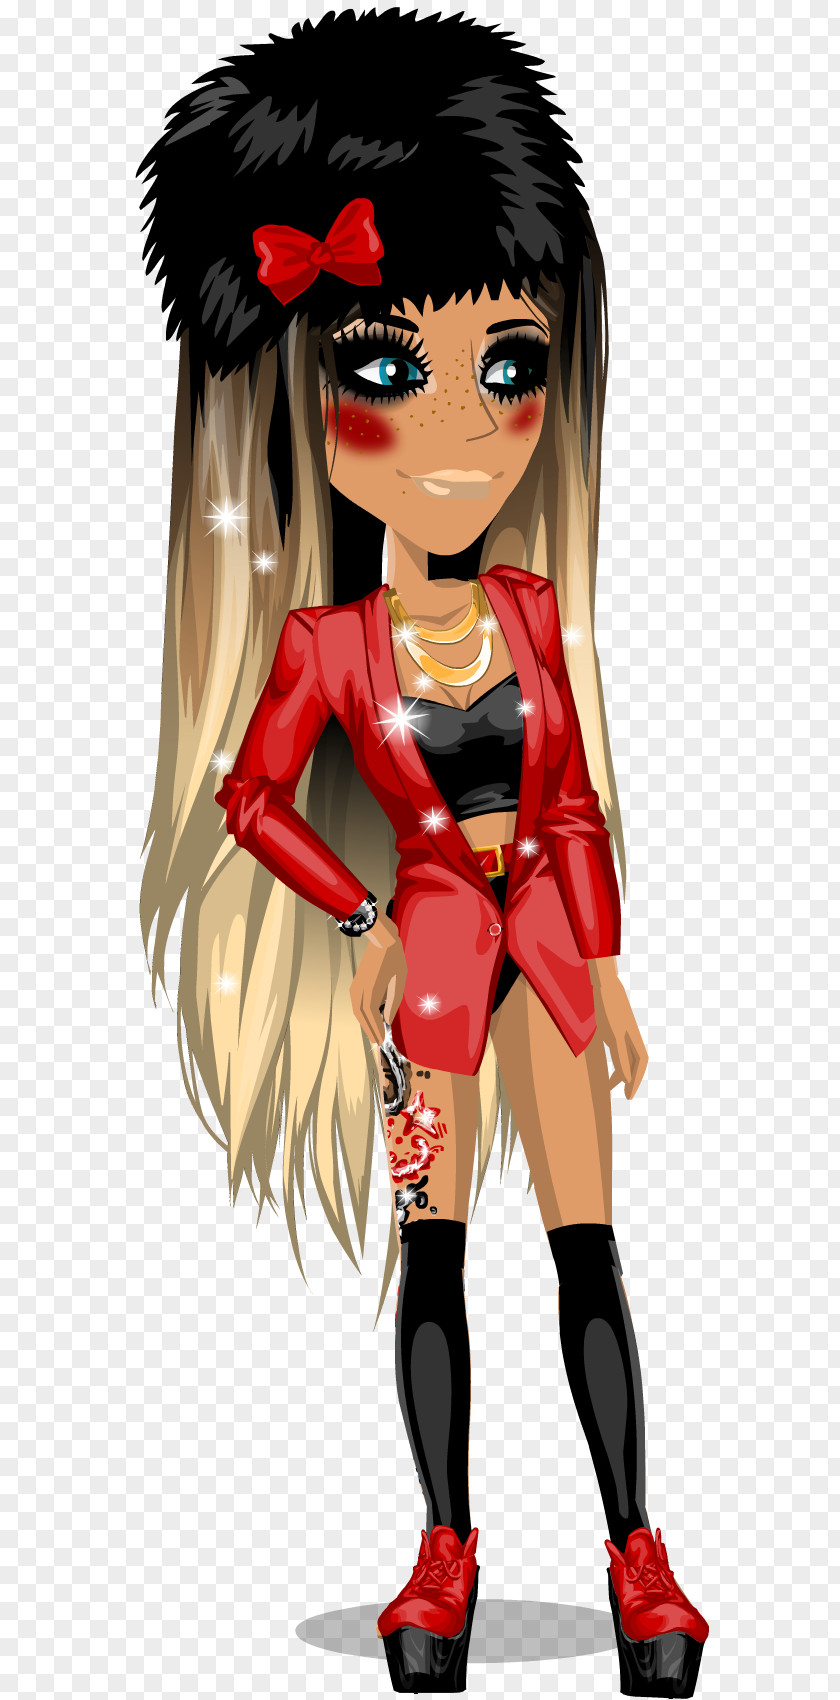 Minnie Mouse MovieStarPlanet Character Clothing PNG